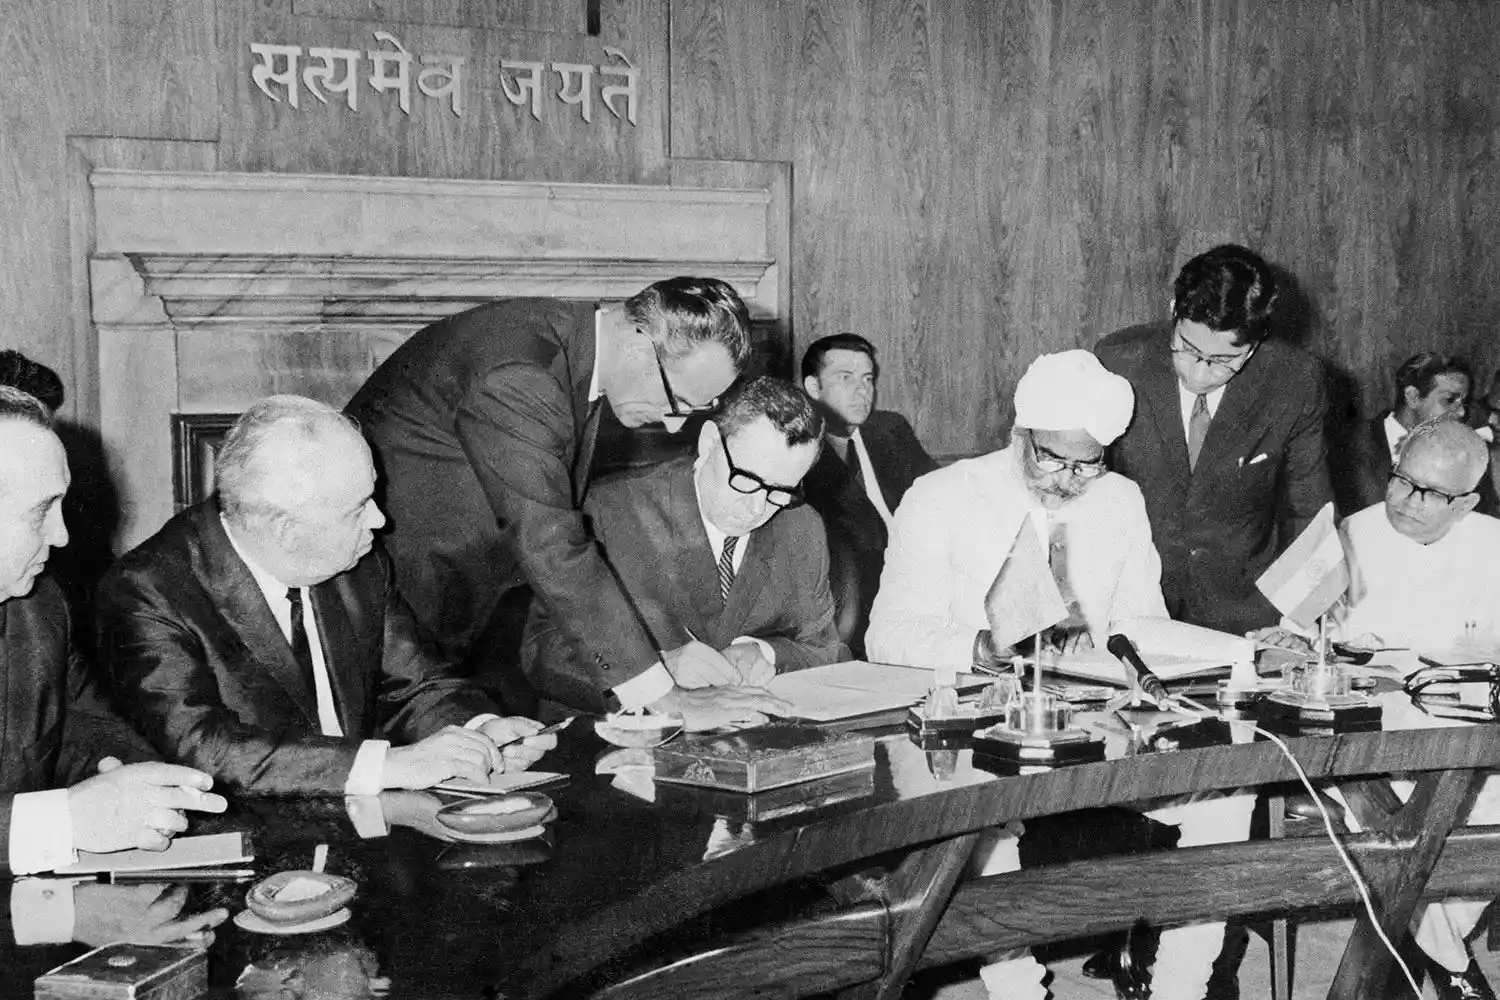 Both the leaders frown as they sign the Treaty of friendship; Image Source: Foreign Policy